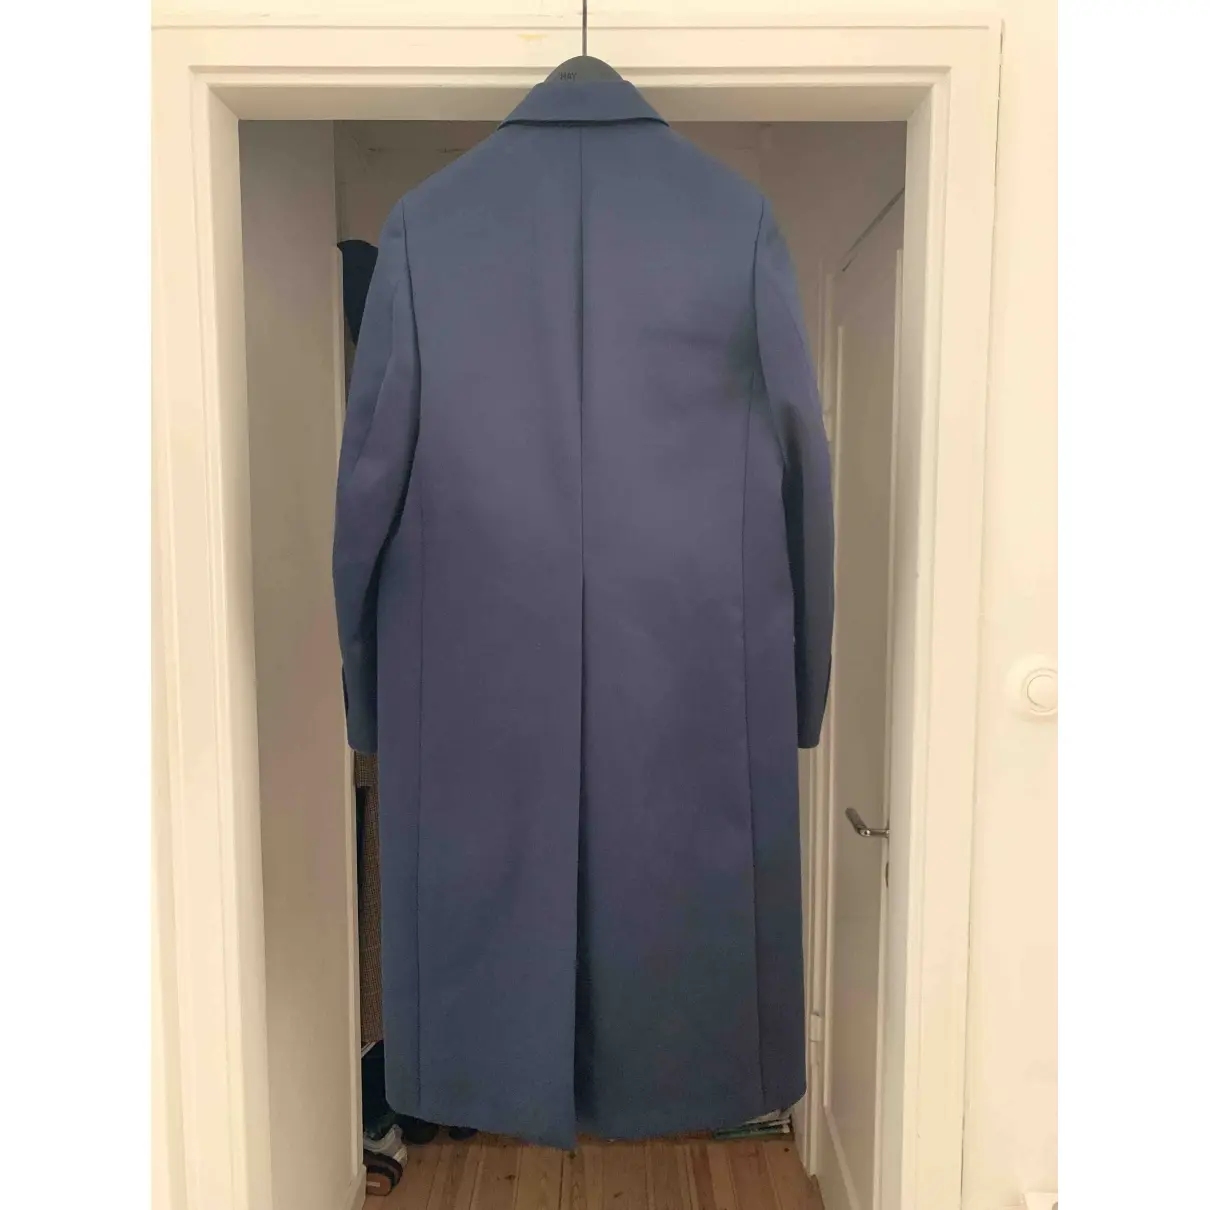 Calvin Klein 205W39NYC Trench coat for sale